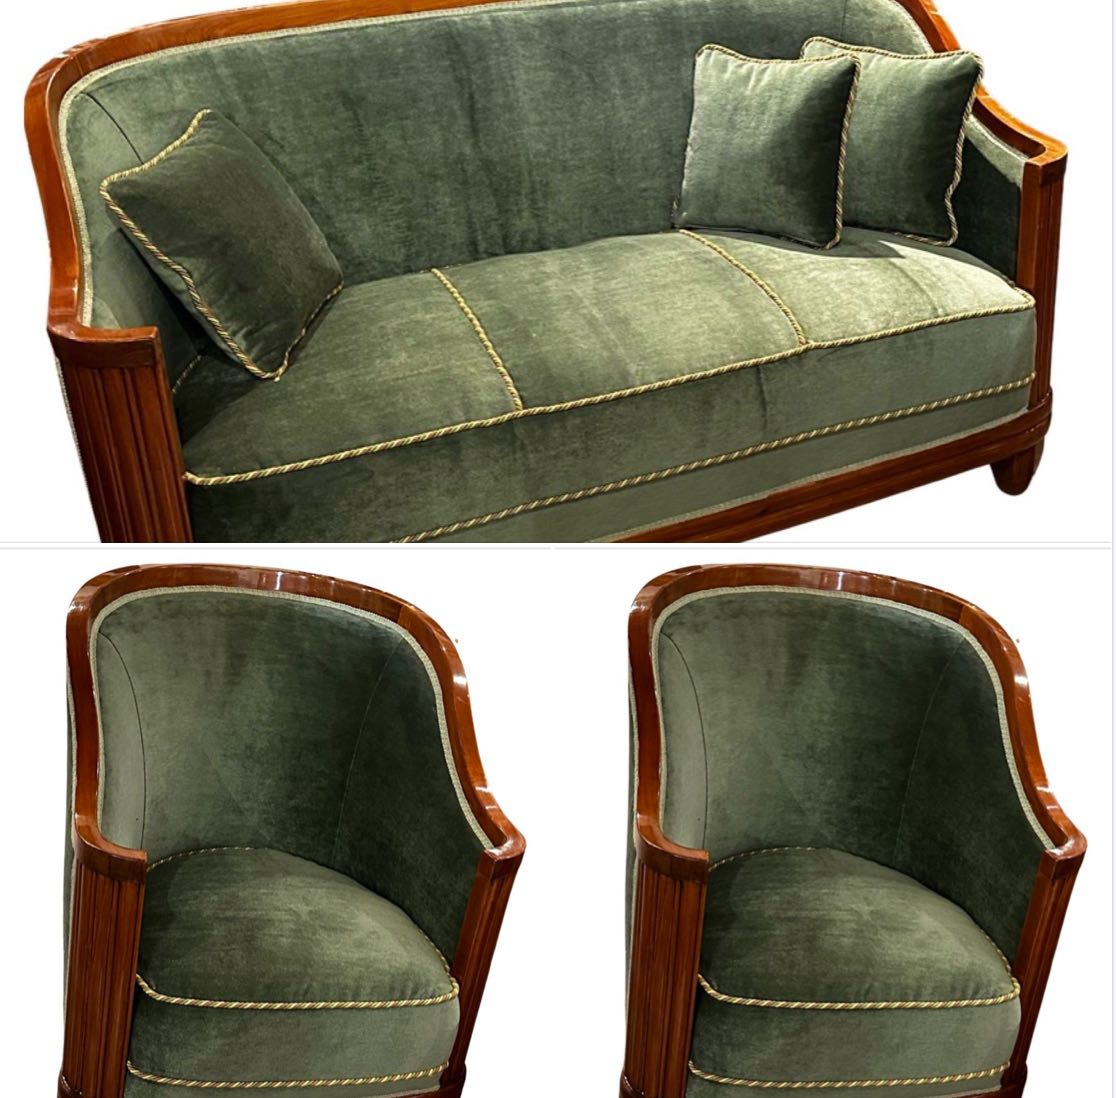 Art Deco Furniture For Sale | Seating Items | Art Deco Collection